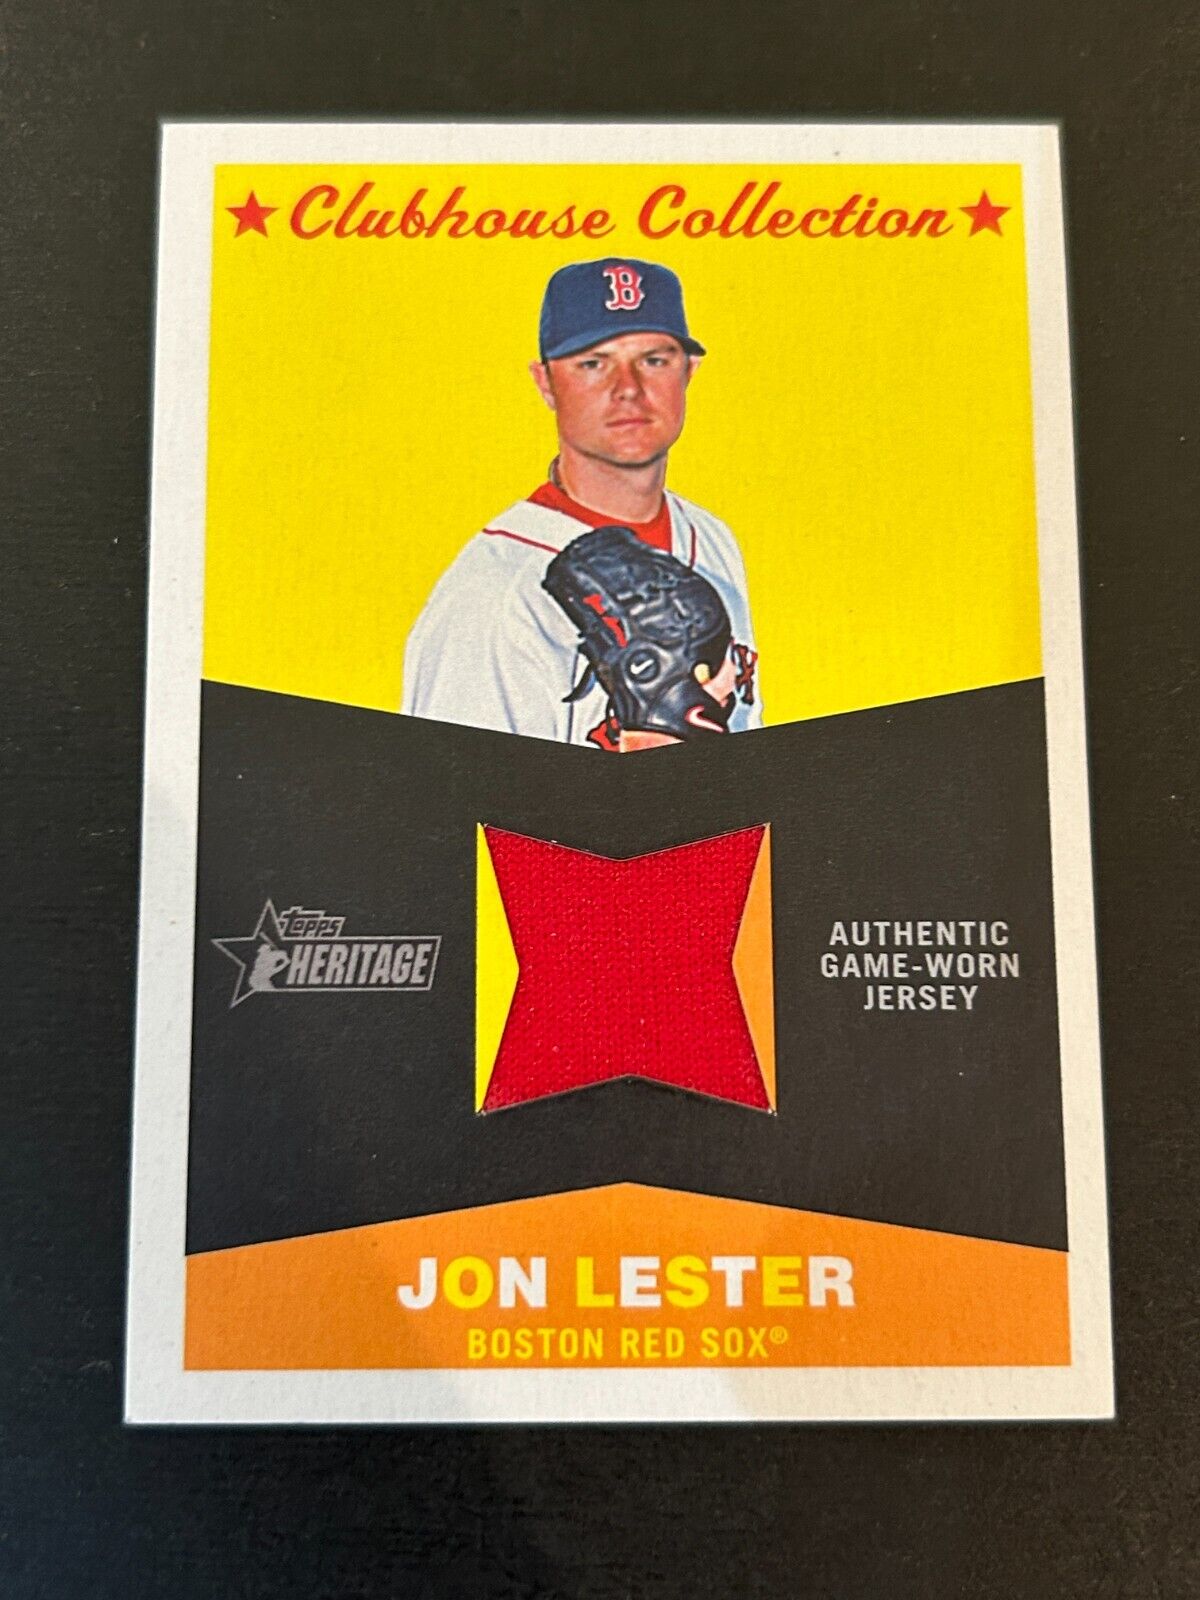 2009 Topps Heritage Clubhouse Collection Jon Lester Jersey Patch Relic Red Sox